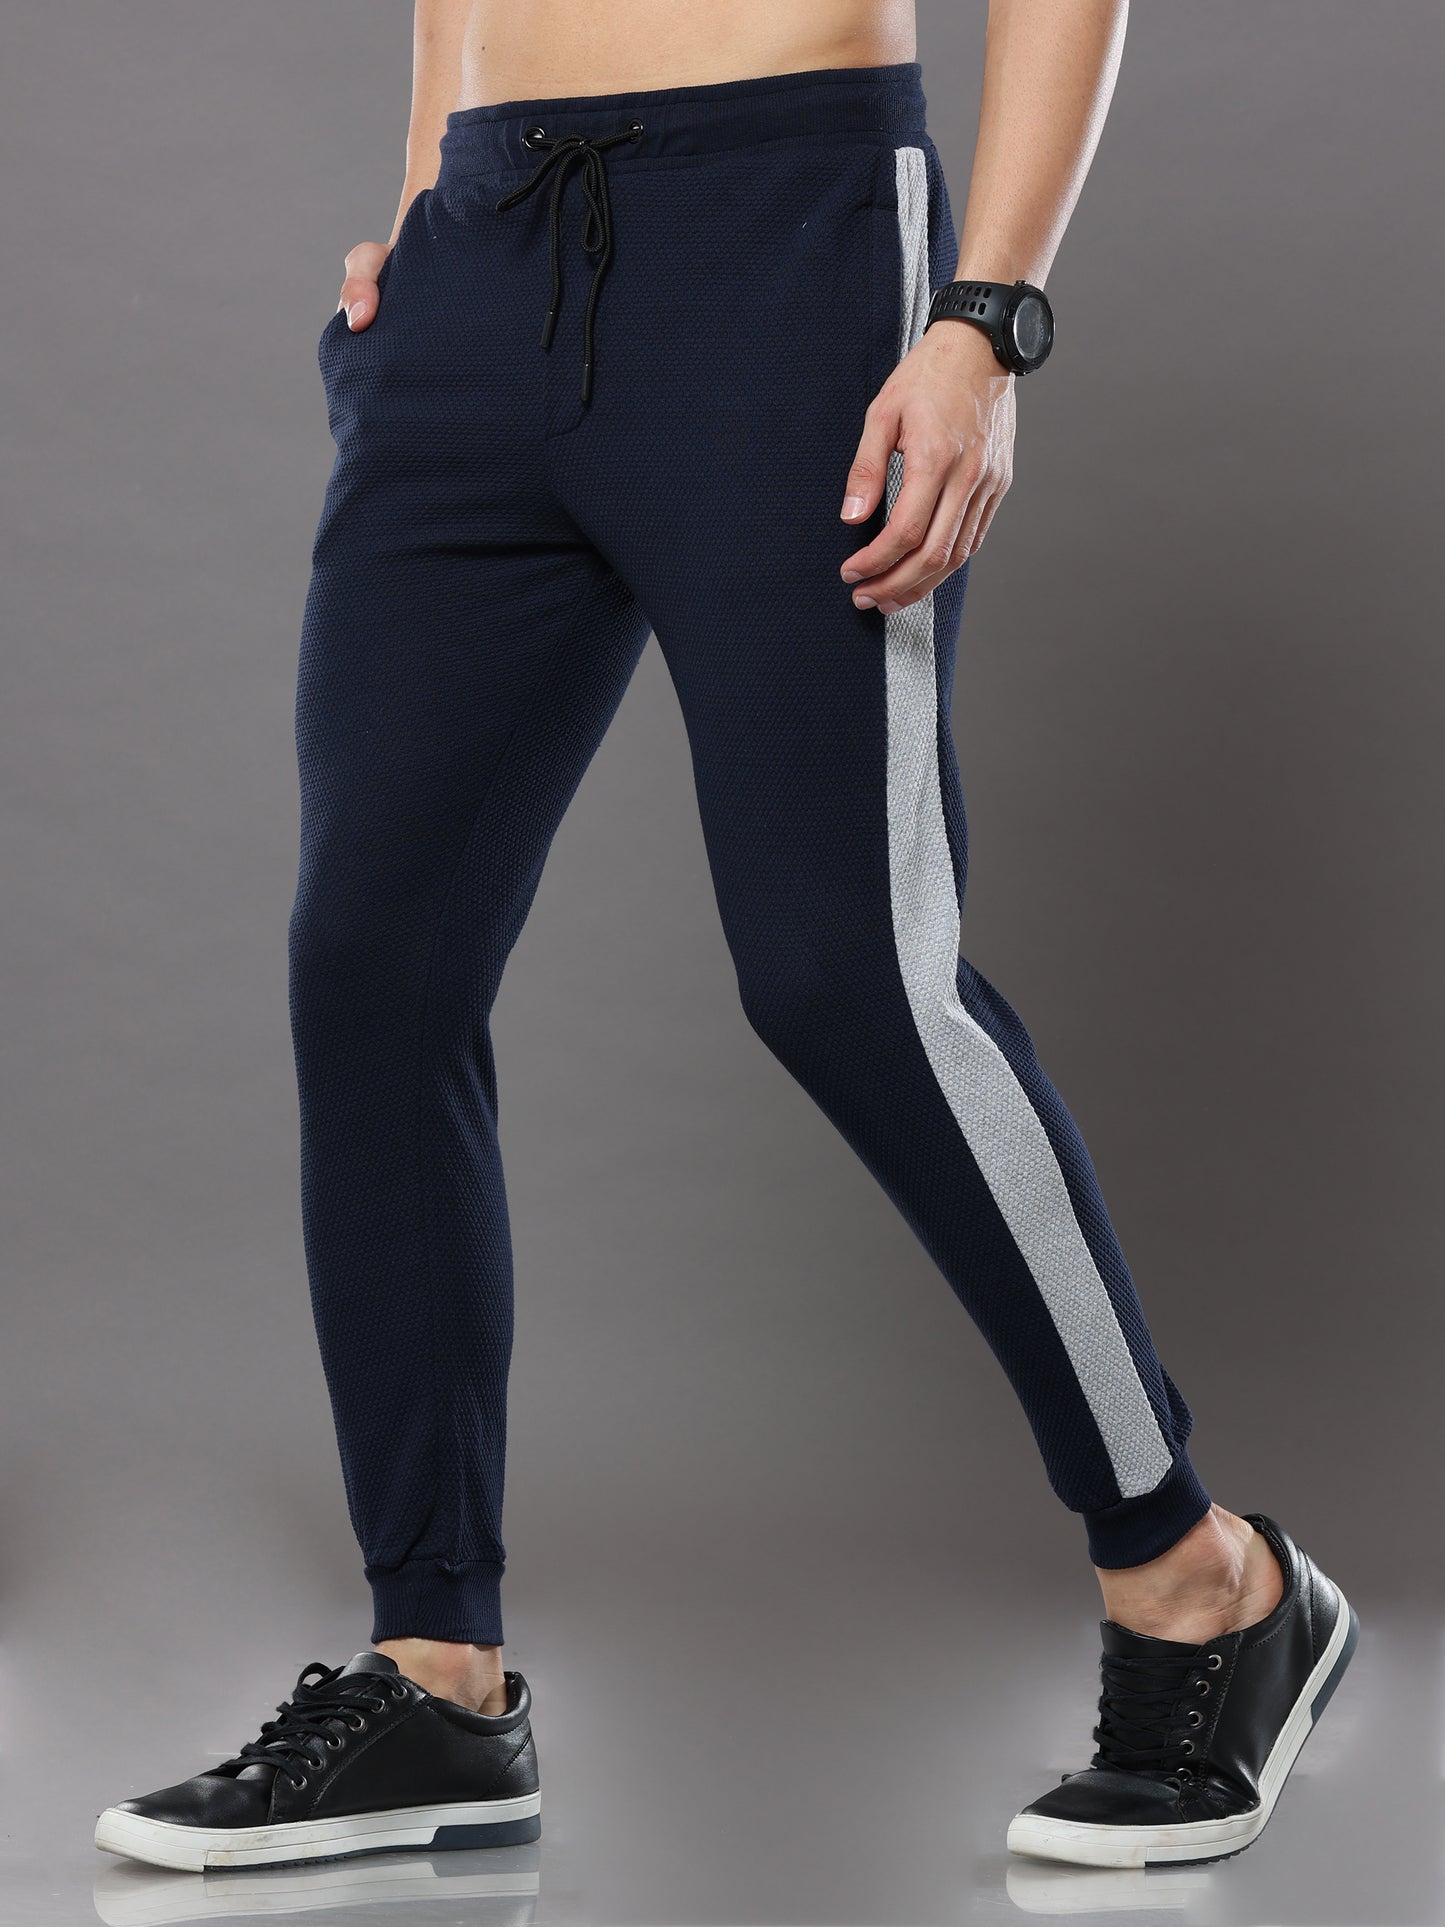 Navy Blue striped casual premium Popcorn Track Pant for mens